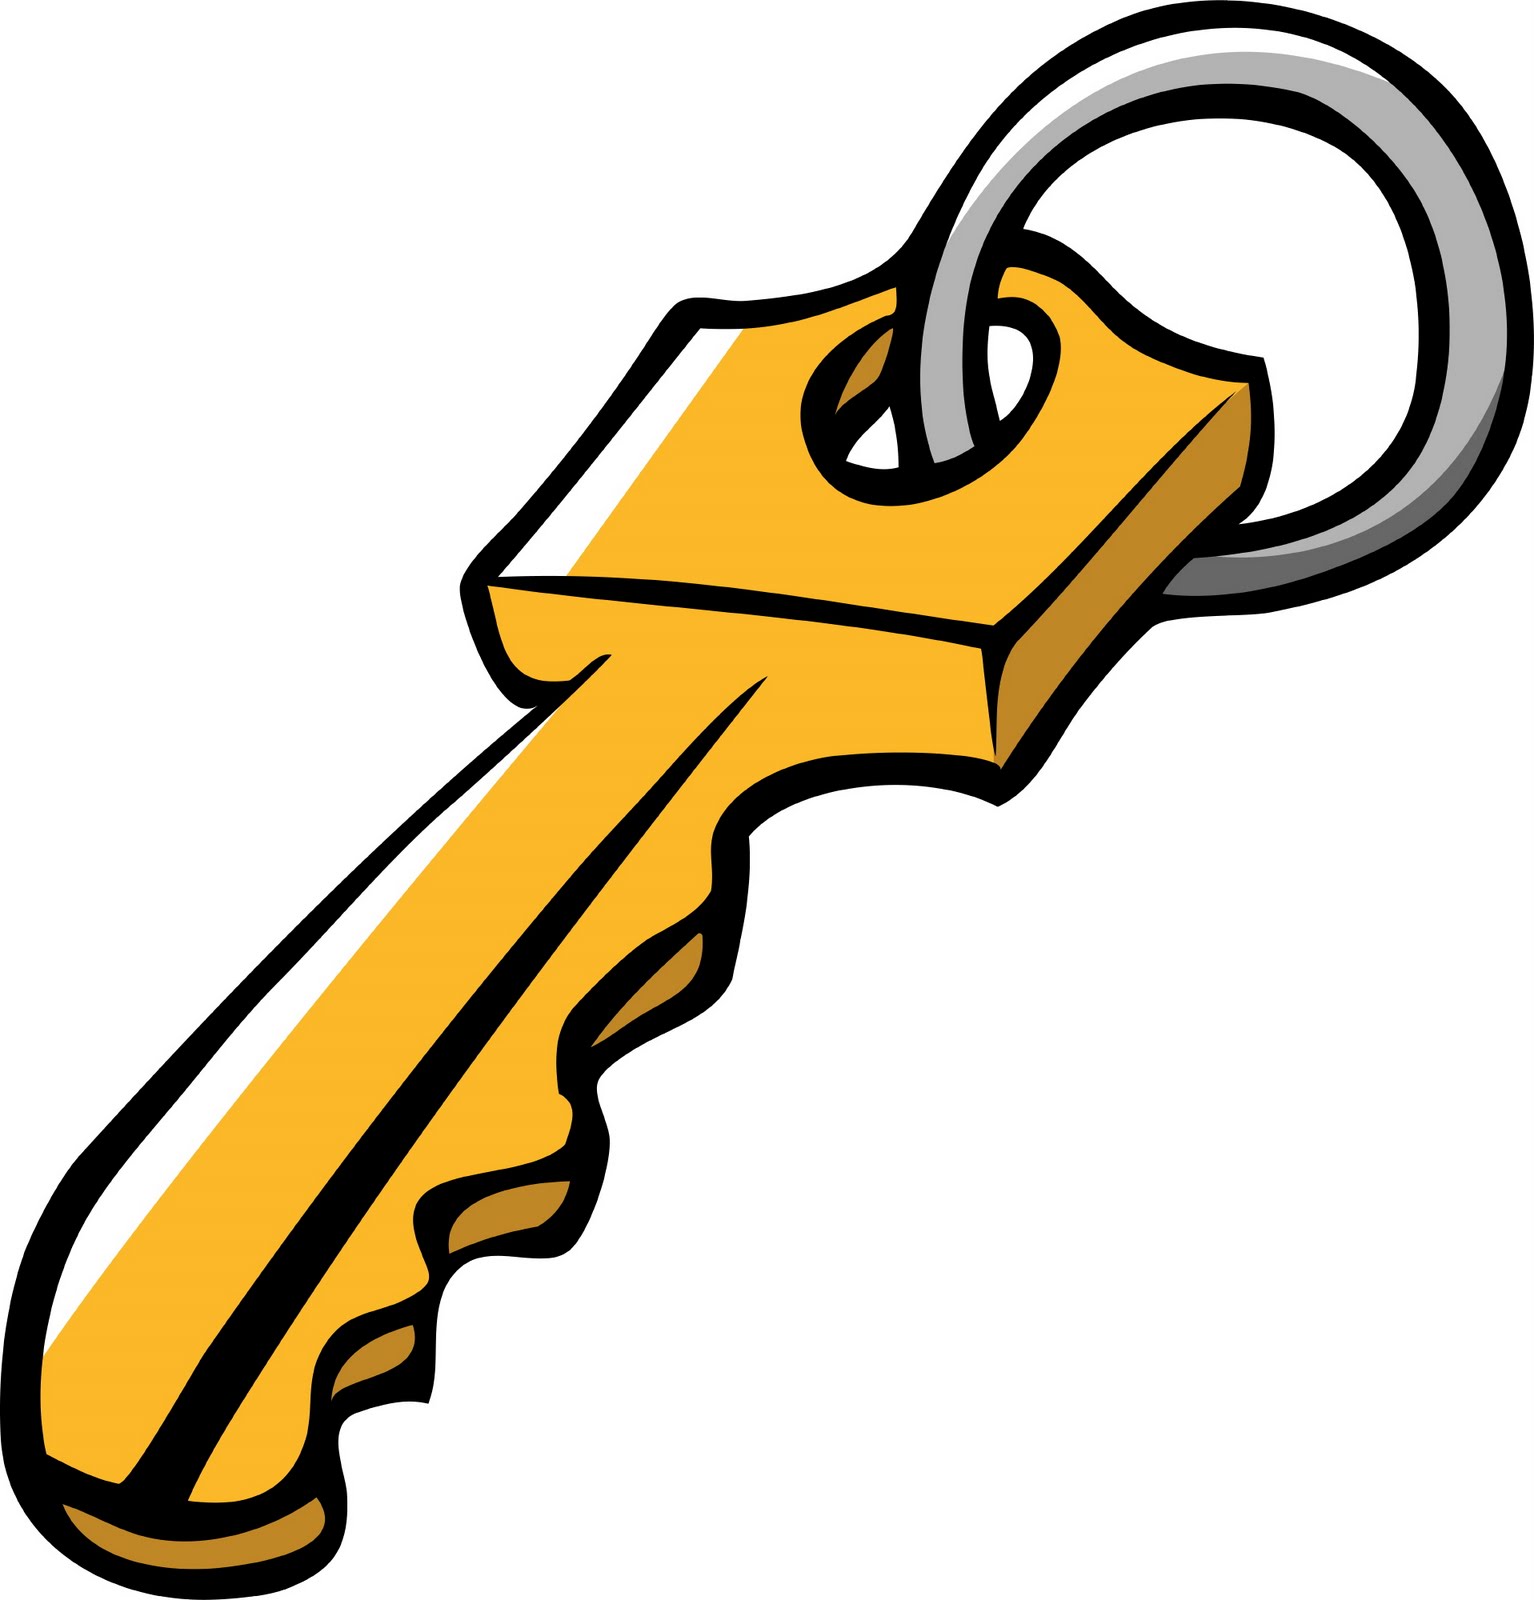 Key clipart cliparts and othe